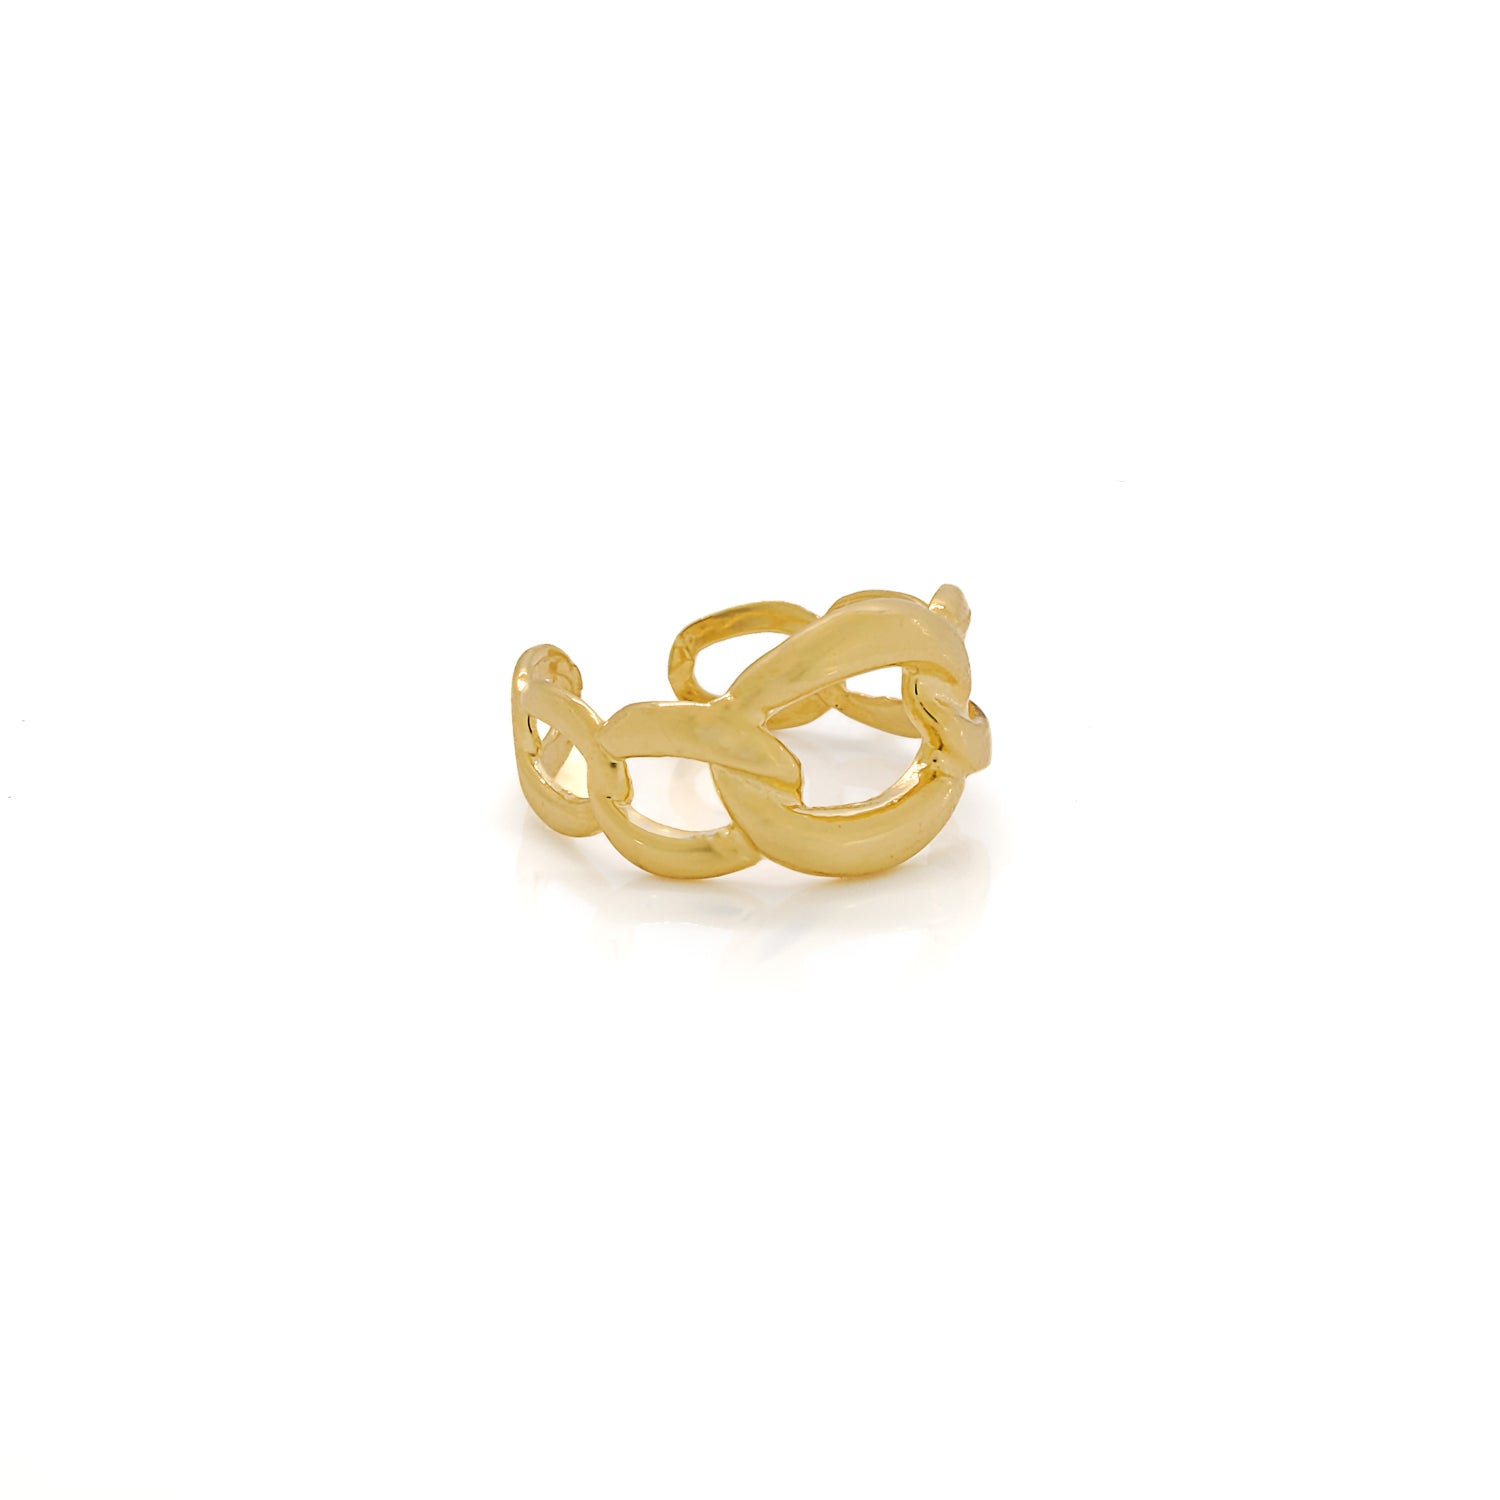 Mira Ring - Sterling Silver and 18K Gold Plating